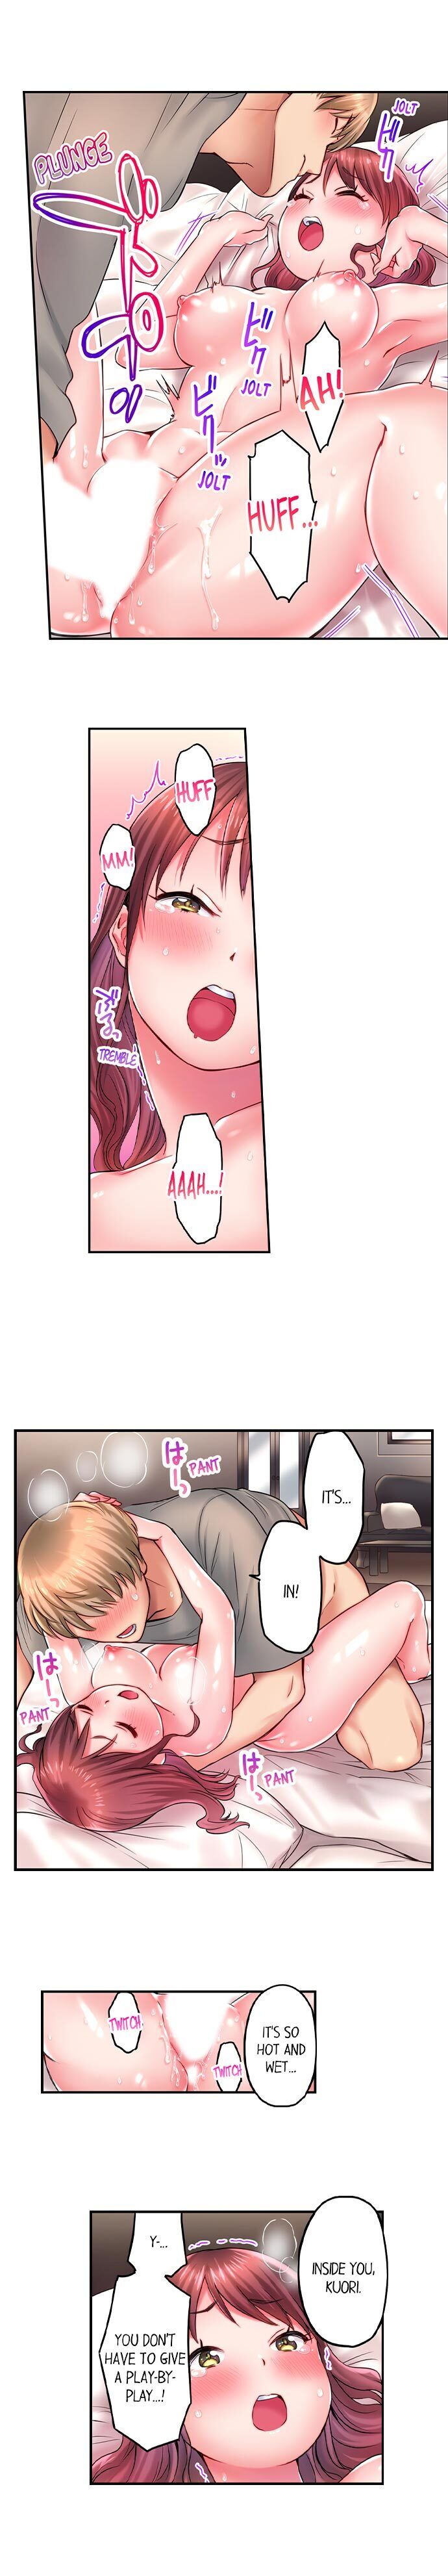 You'll Cum in Less Than a Minute! - Chapter 9 Page 3